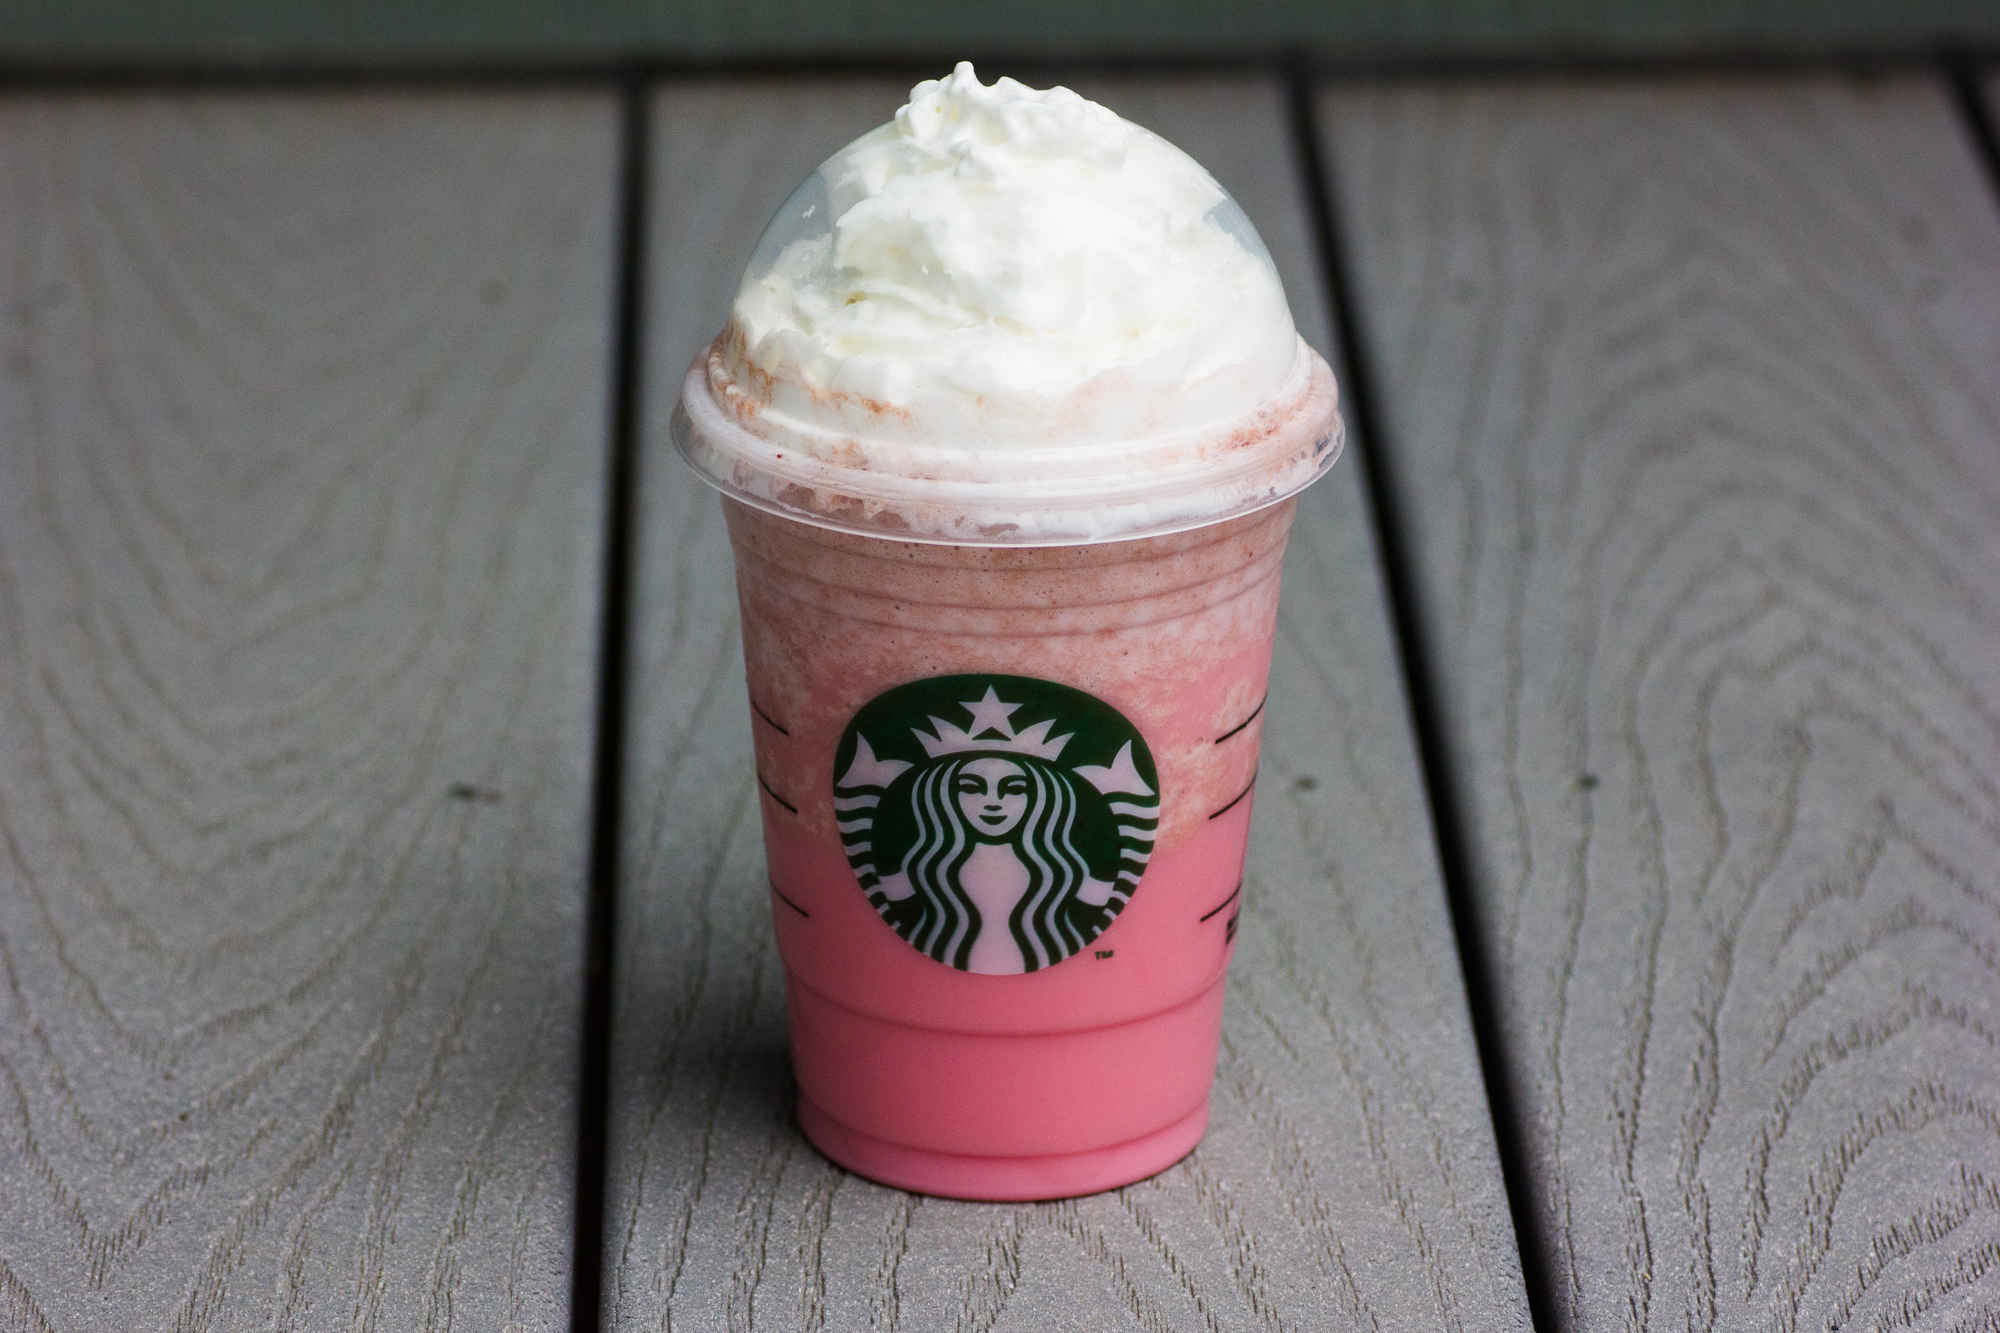 Green tea frappuccino with 10 pumps of raspberry